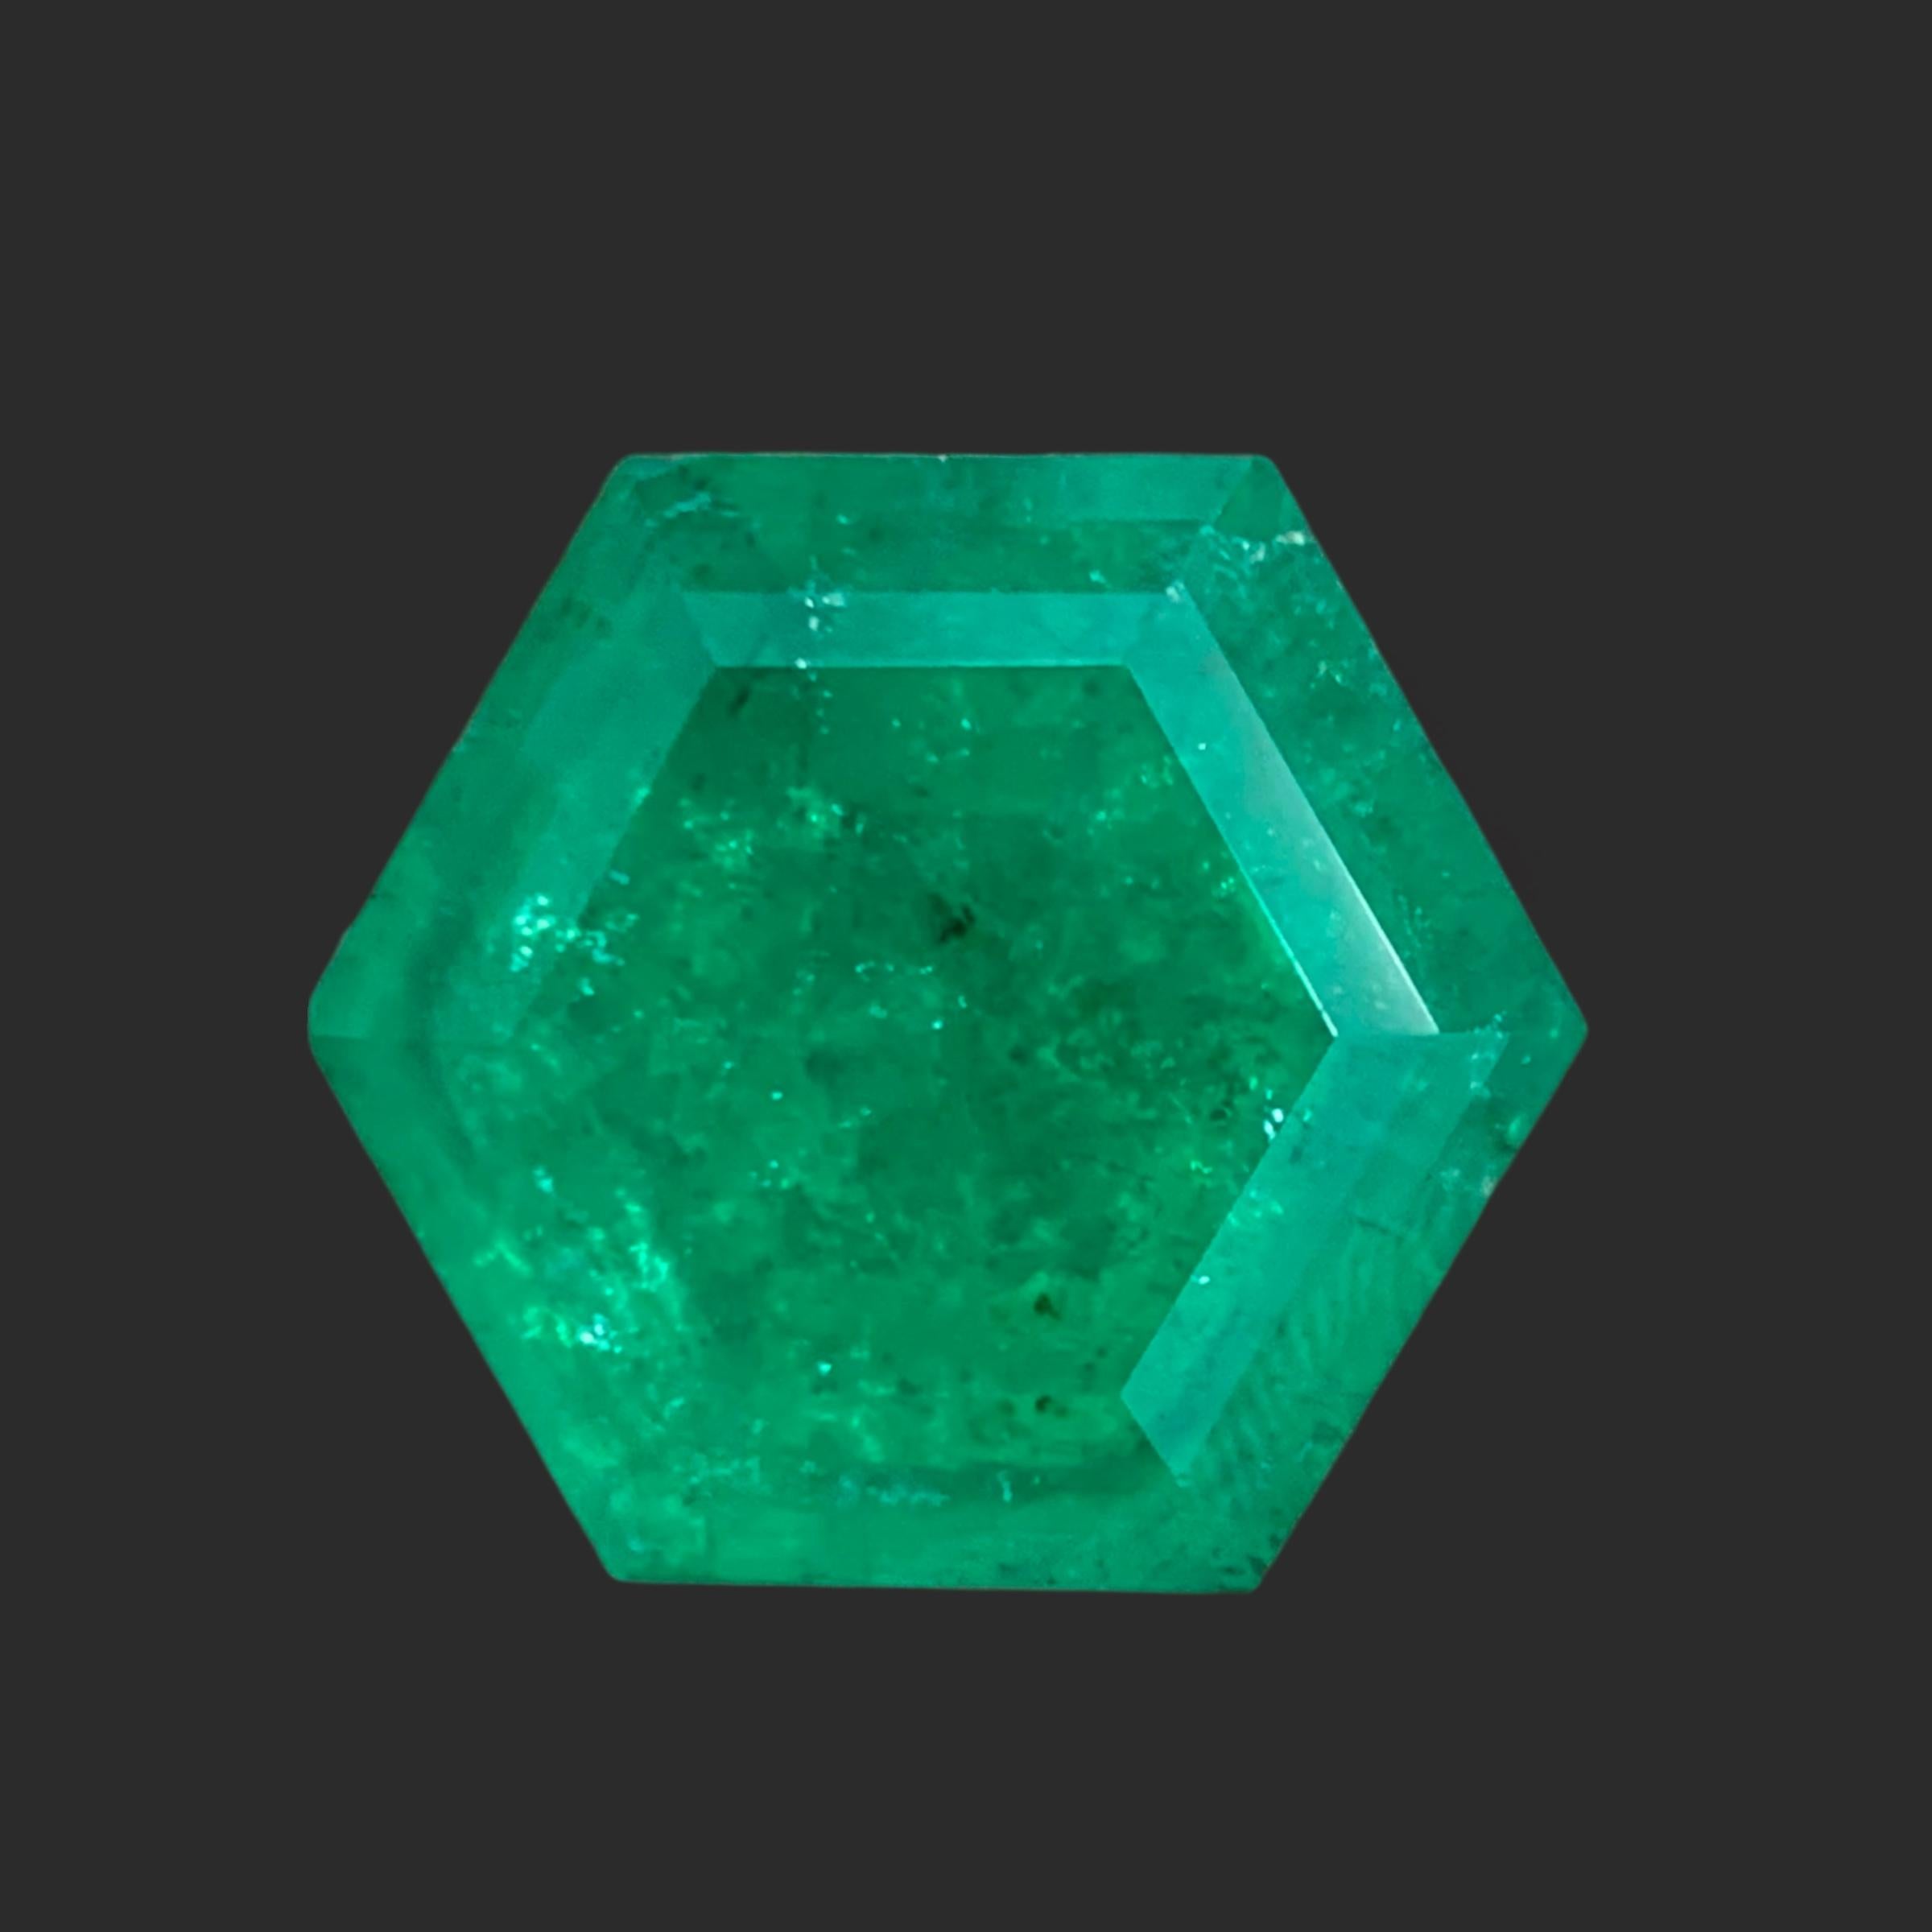 GEMSTONE TYPE: Emerald
PIECE(S): 1
WEIGHT: 16.80 Carats
SHAPE: Hexagon Step Cut
SIZE (MM):  16.20 x 16.02 x 10.03
COLOR: Vivid Bluish Green
CLARITY: SI Semi Transparent 
TREATMENT: Oiled Only
ORIGIN: Panjshir Valley, Afghanistan
CERTIFICATE: GGI
Lab